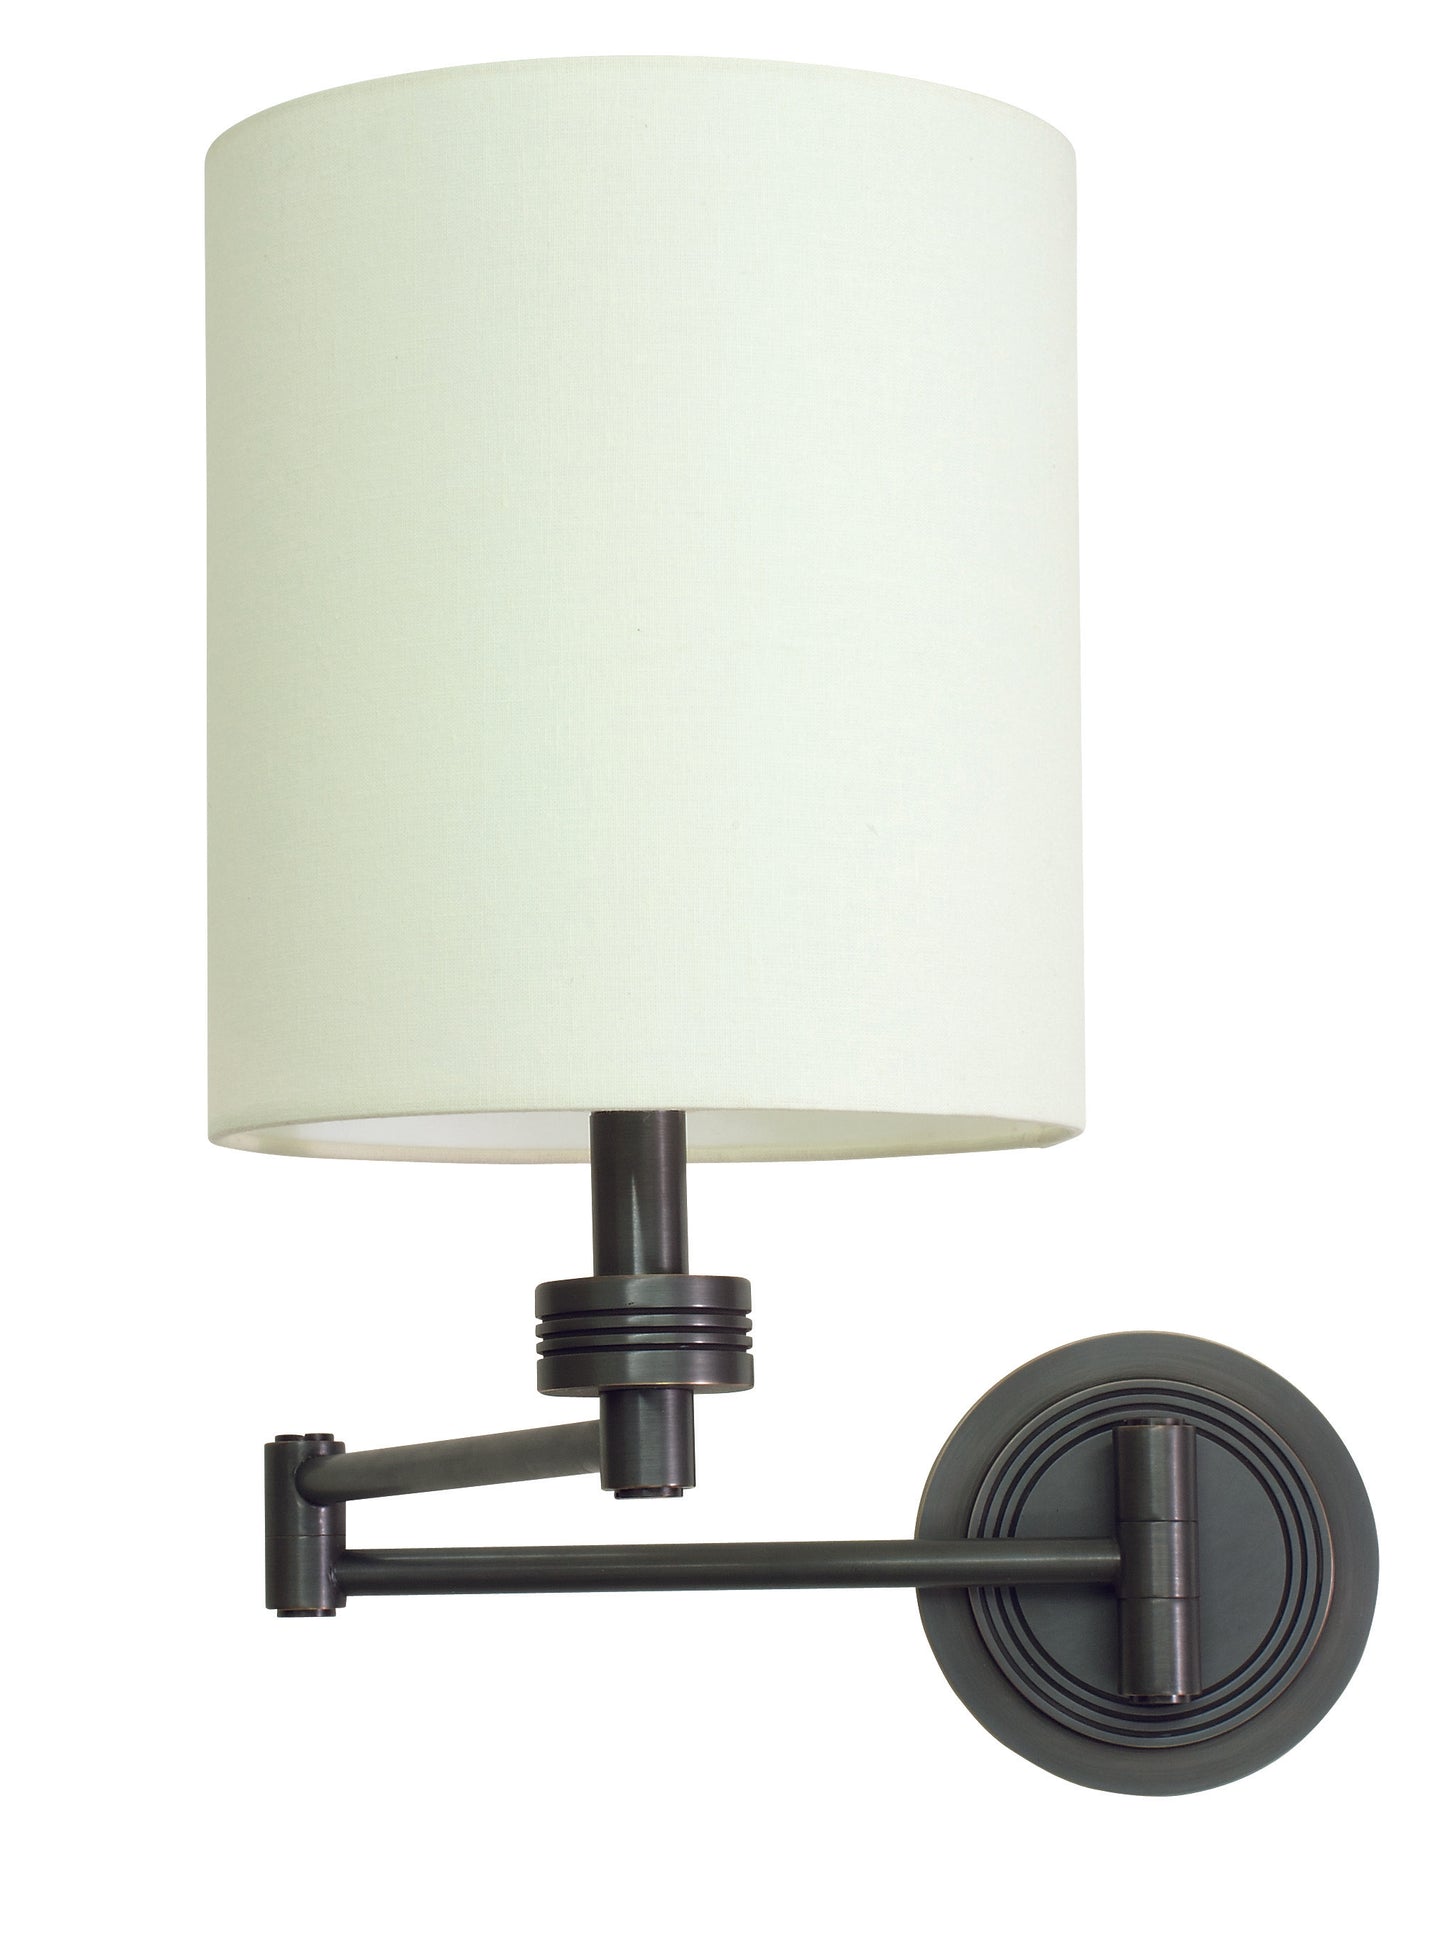 House of Troy Wall Swing Arm Lamp in Oil Rubbed Bronze WS775-OB